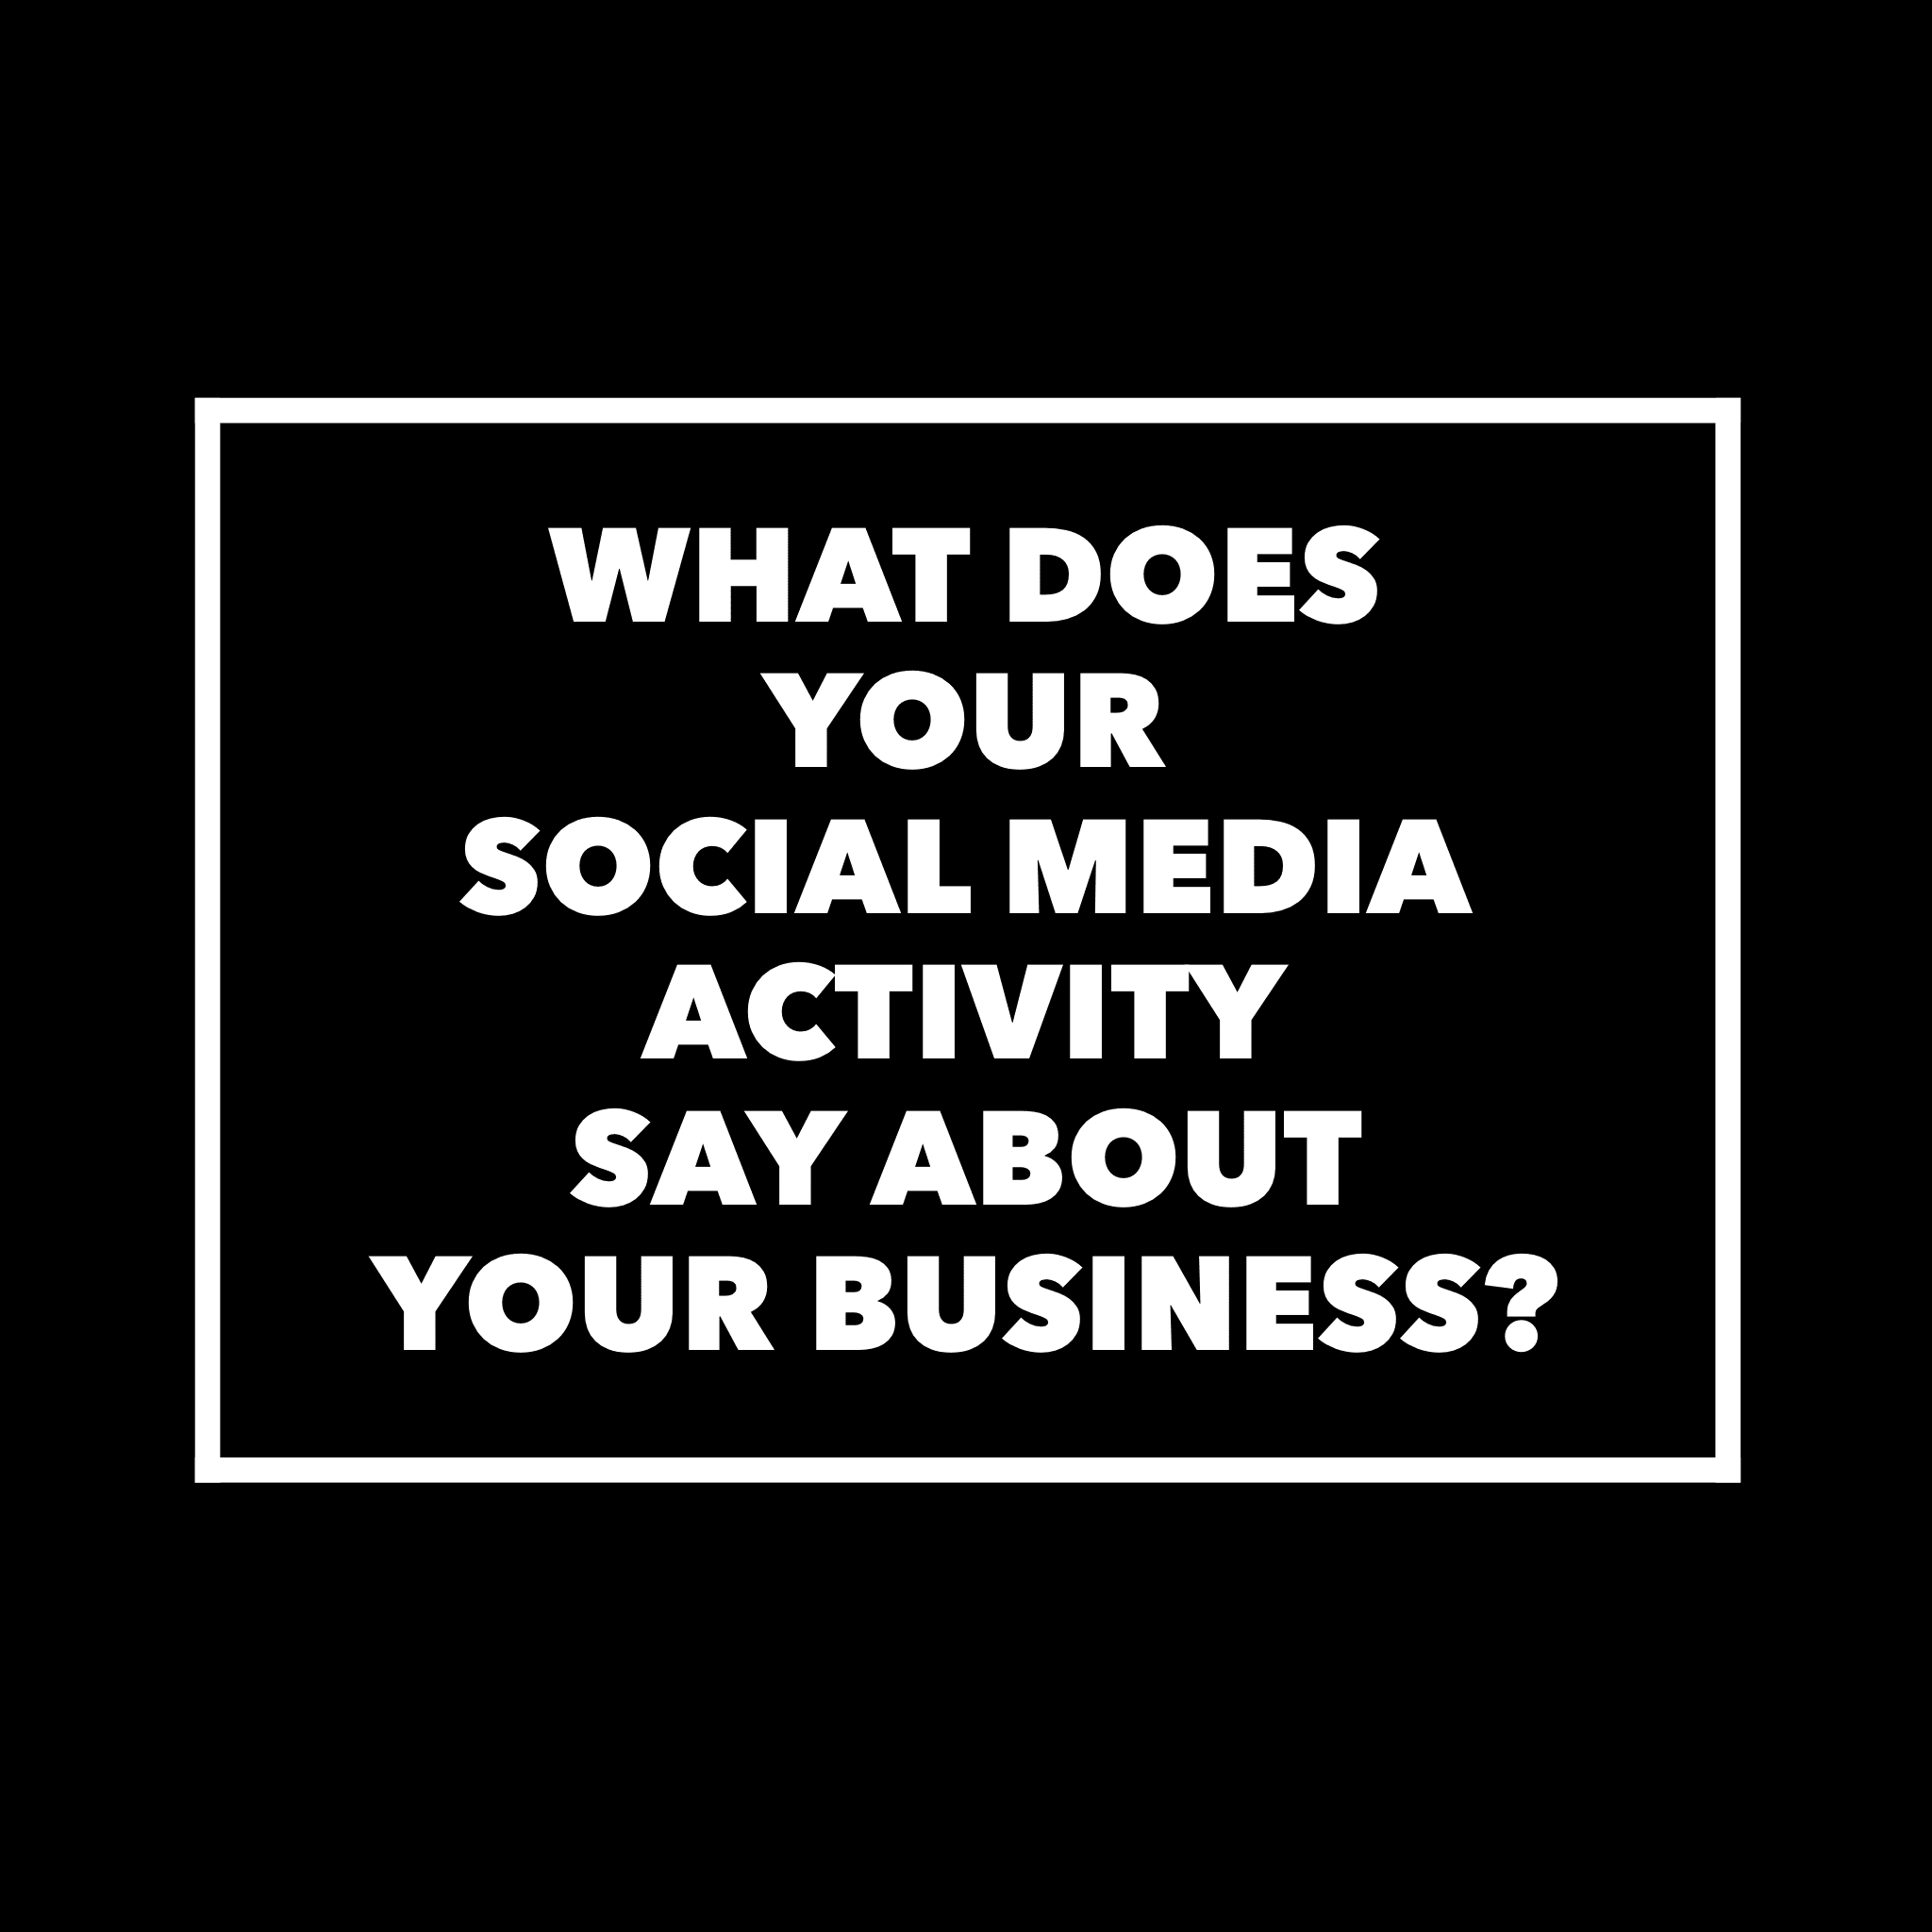 What Does Your Social Media Activity Say About Your Business